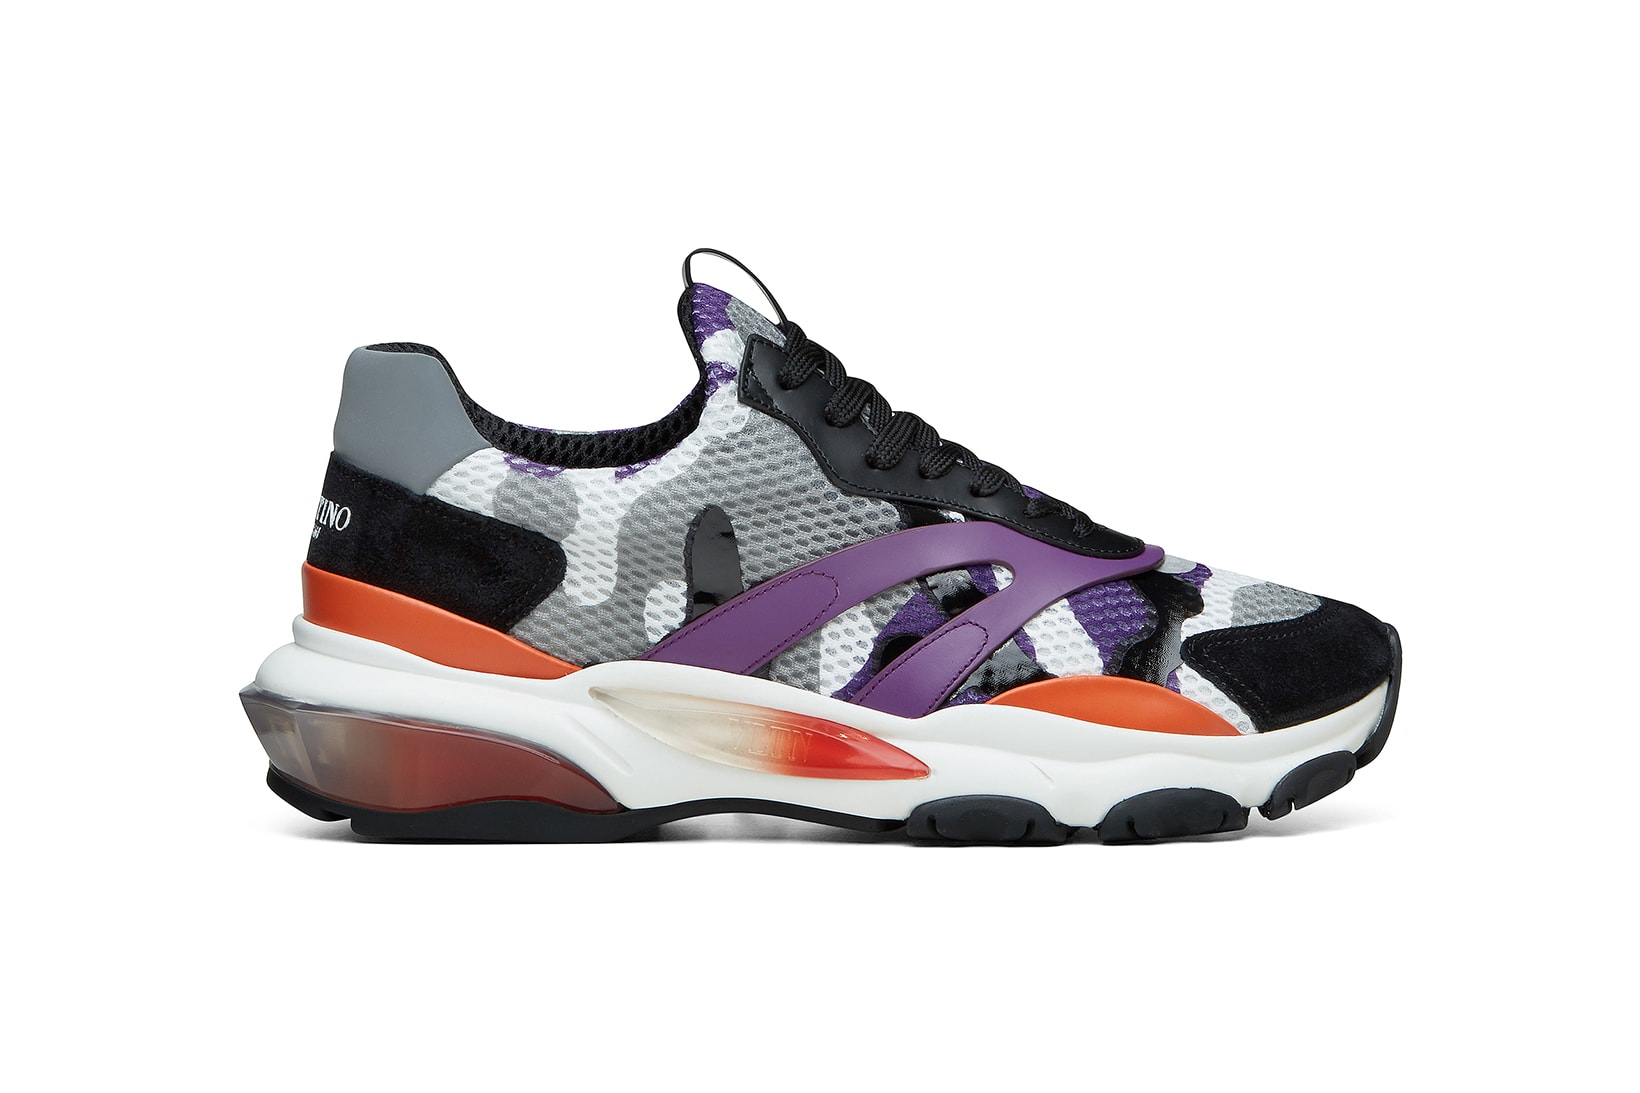 Valentino Spring Summer 2018 Bounce Sneakers orange purple release date info drop shoes footwear runner chunky clunky